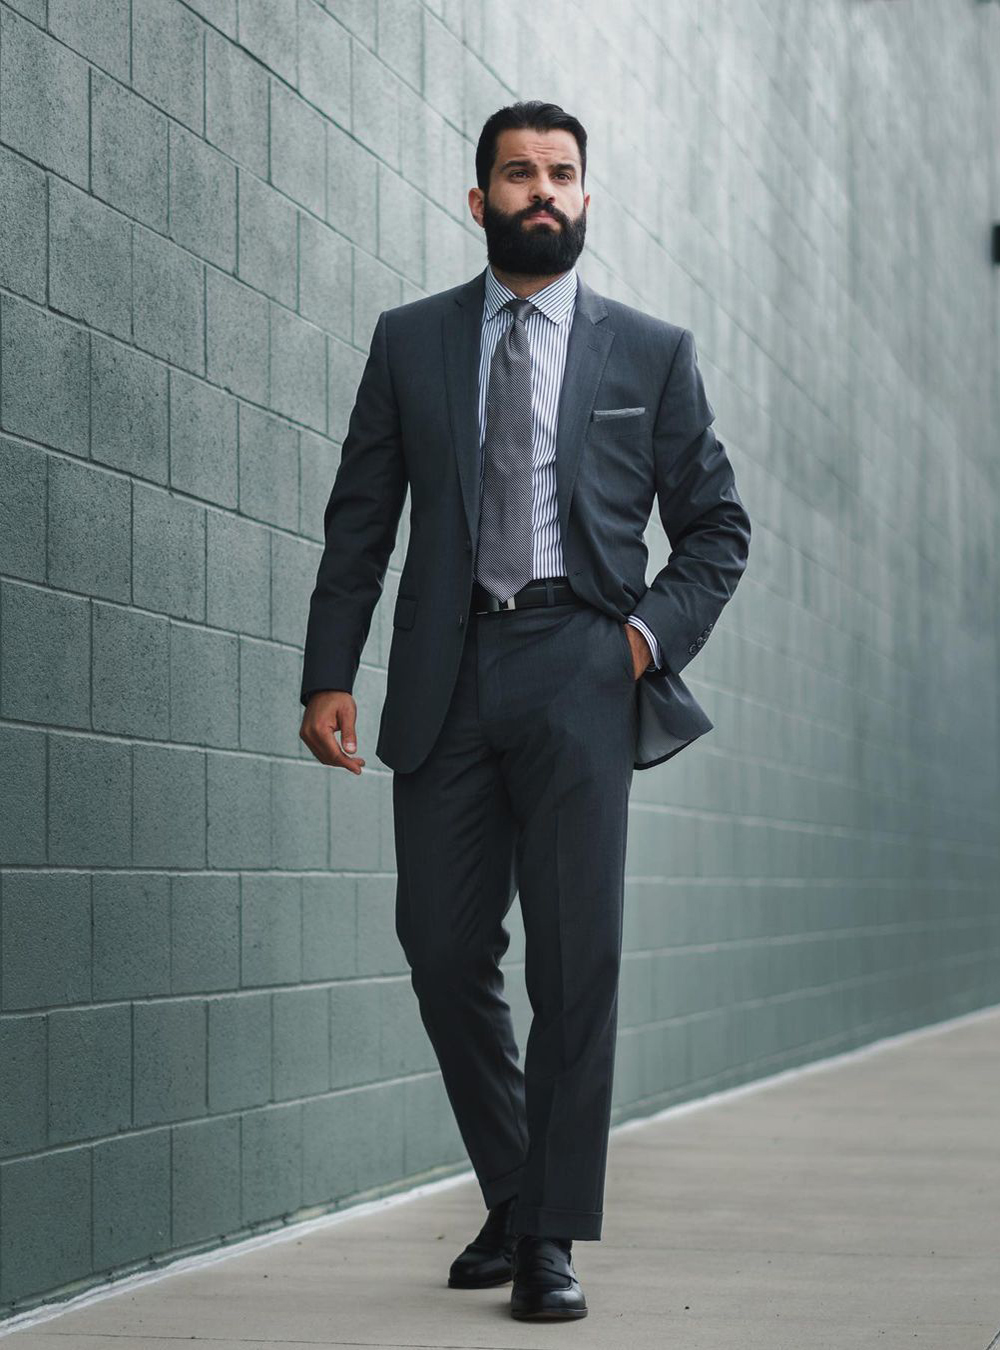 Charcoal suit with black loafers and black socks